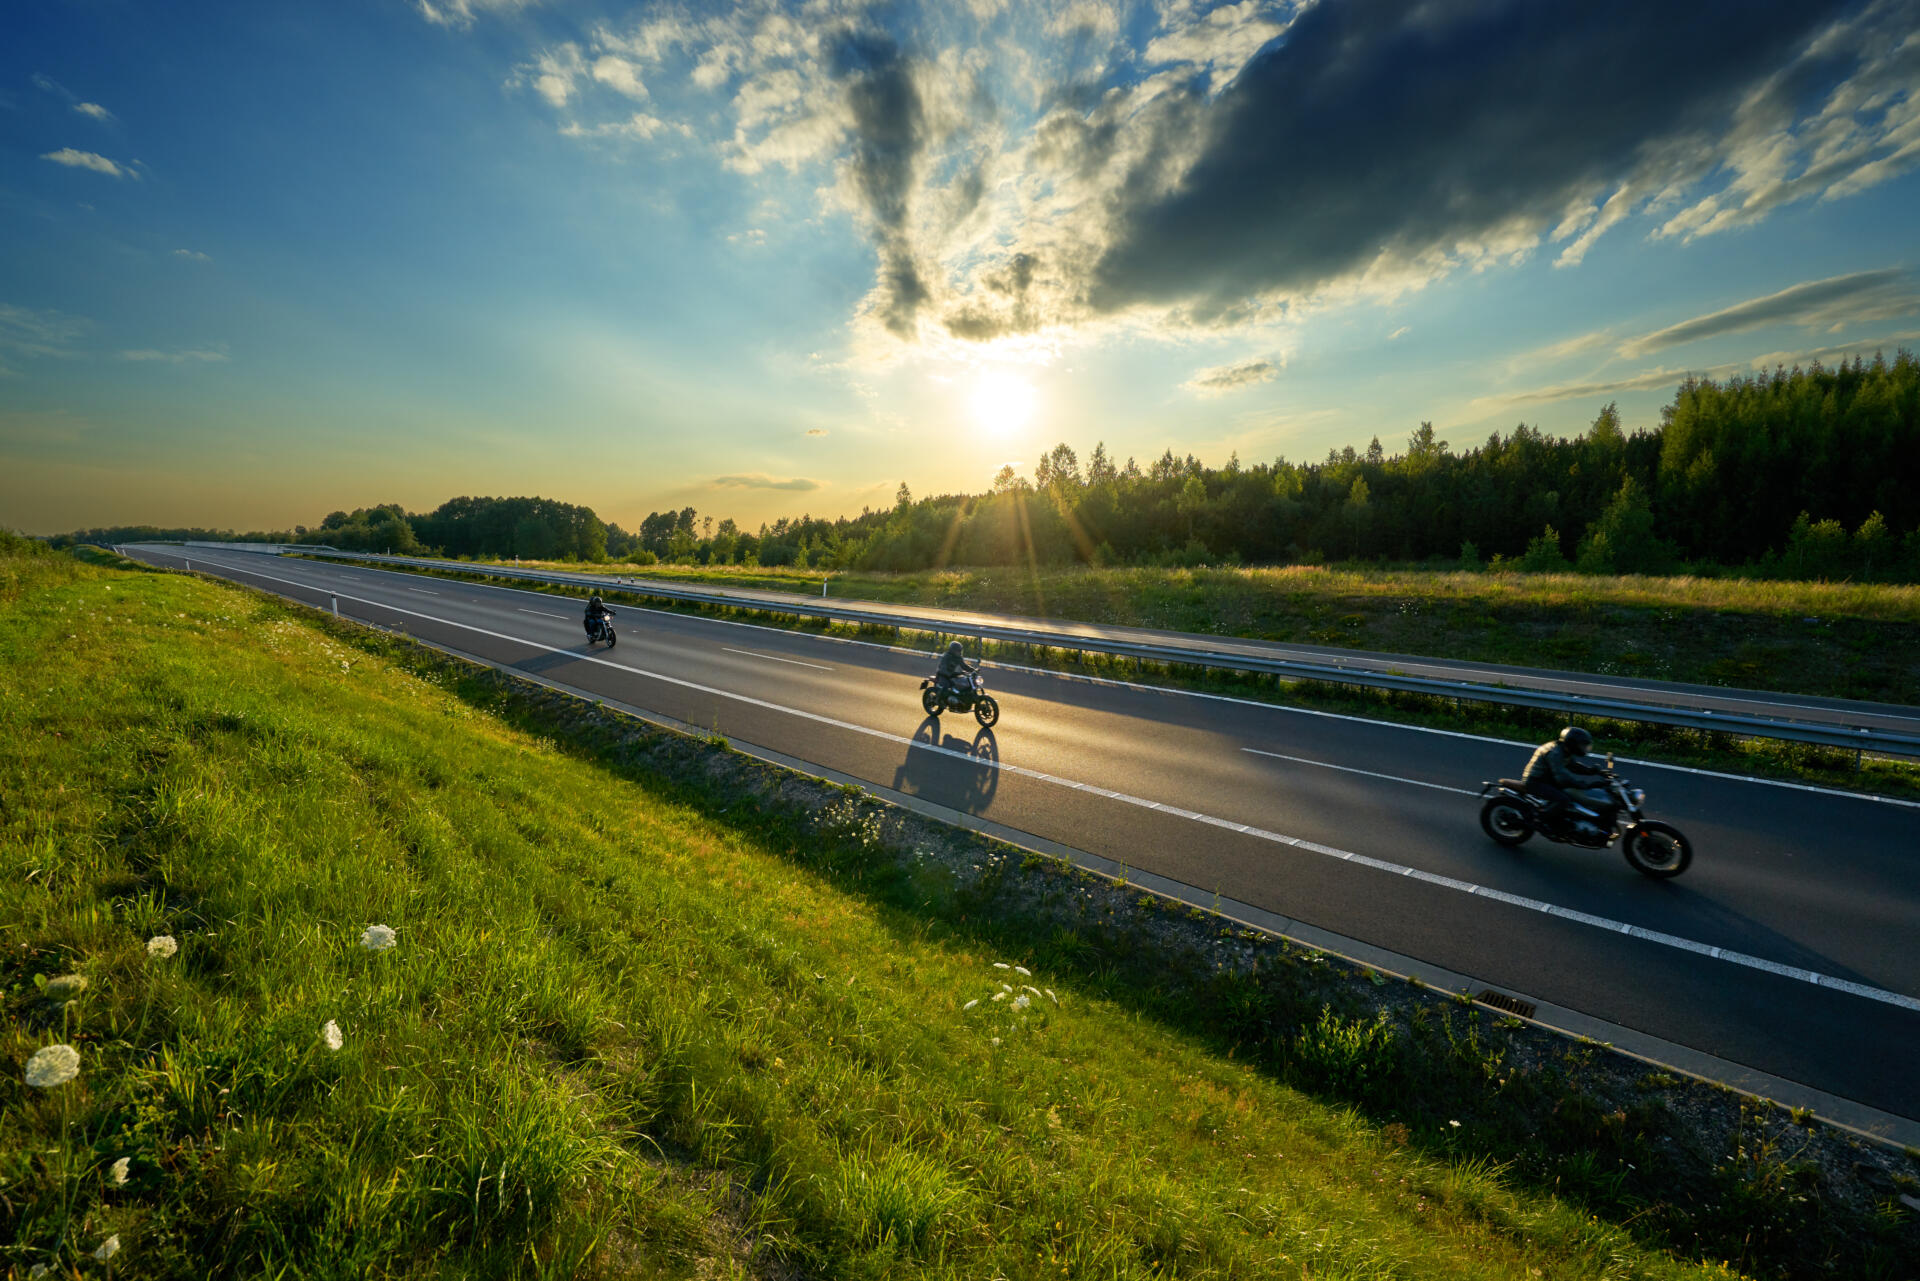 Motorcycles riding on the highway in the countryside in the rays of the sunset